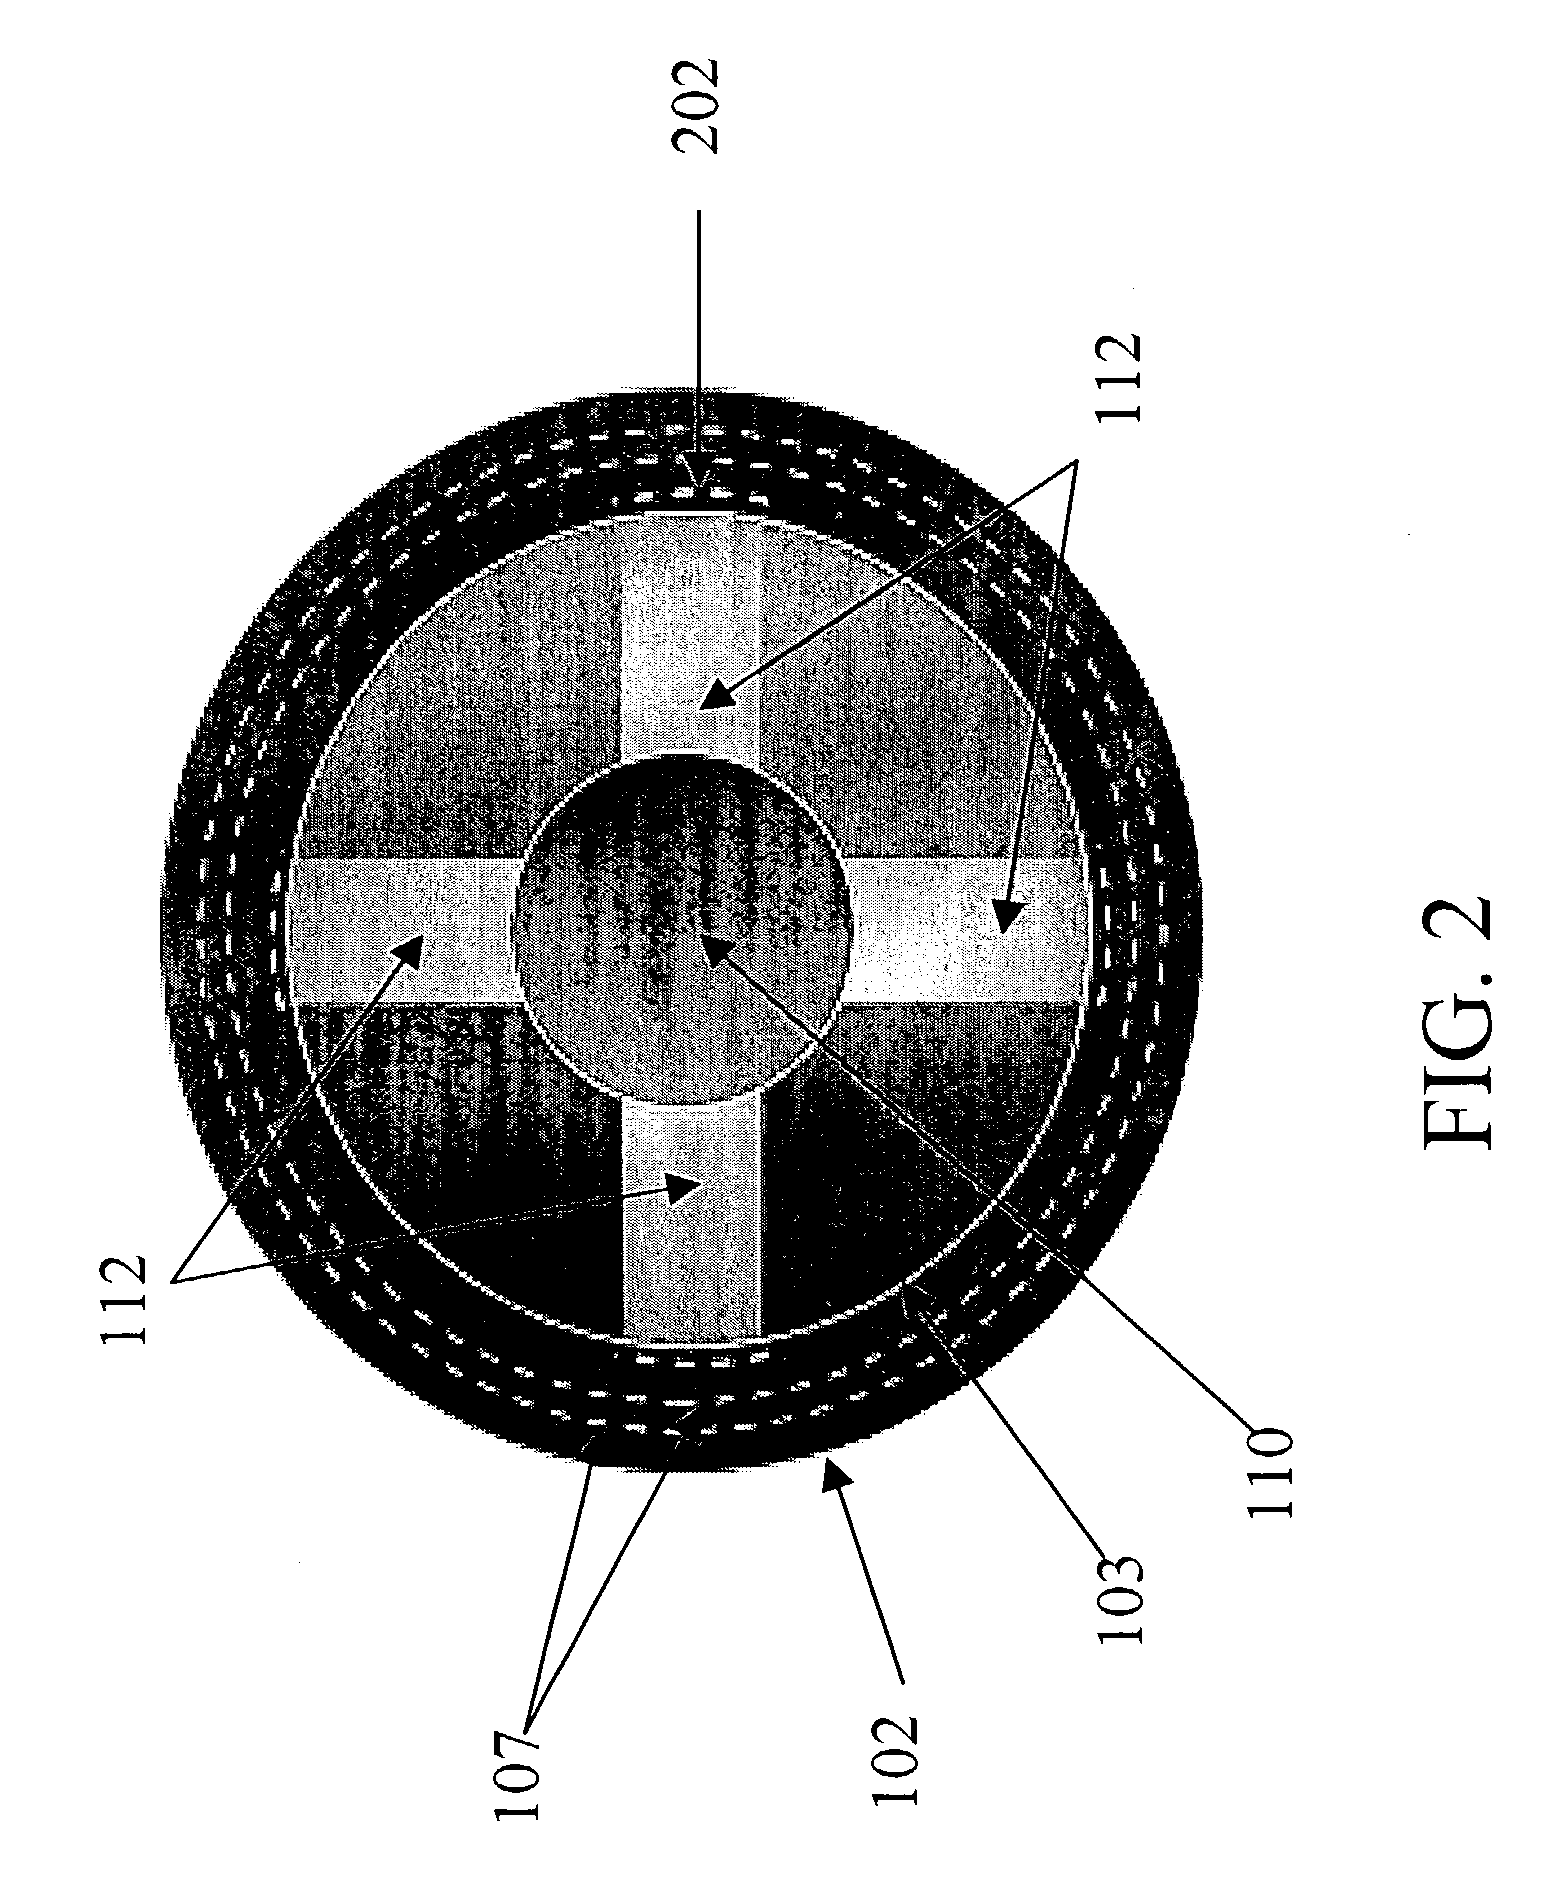 Toroidal propulsion and steering system